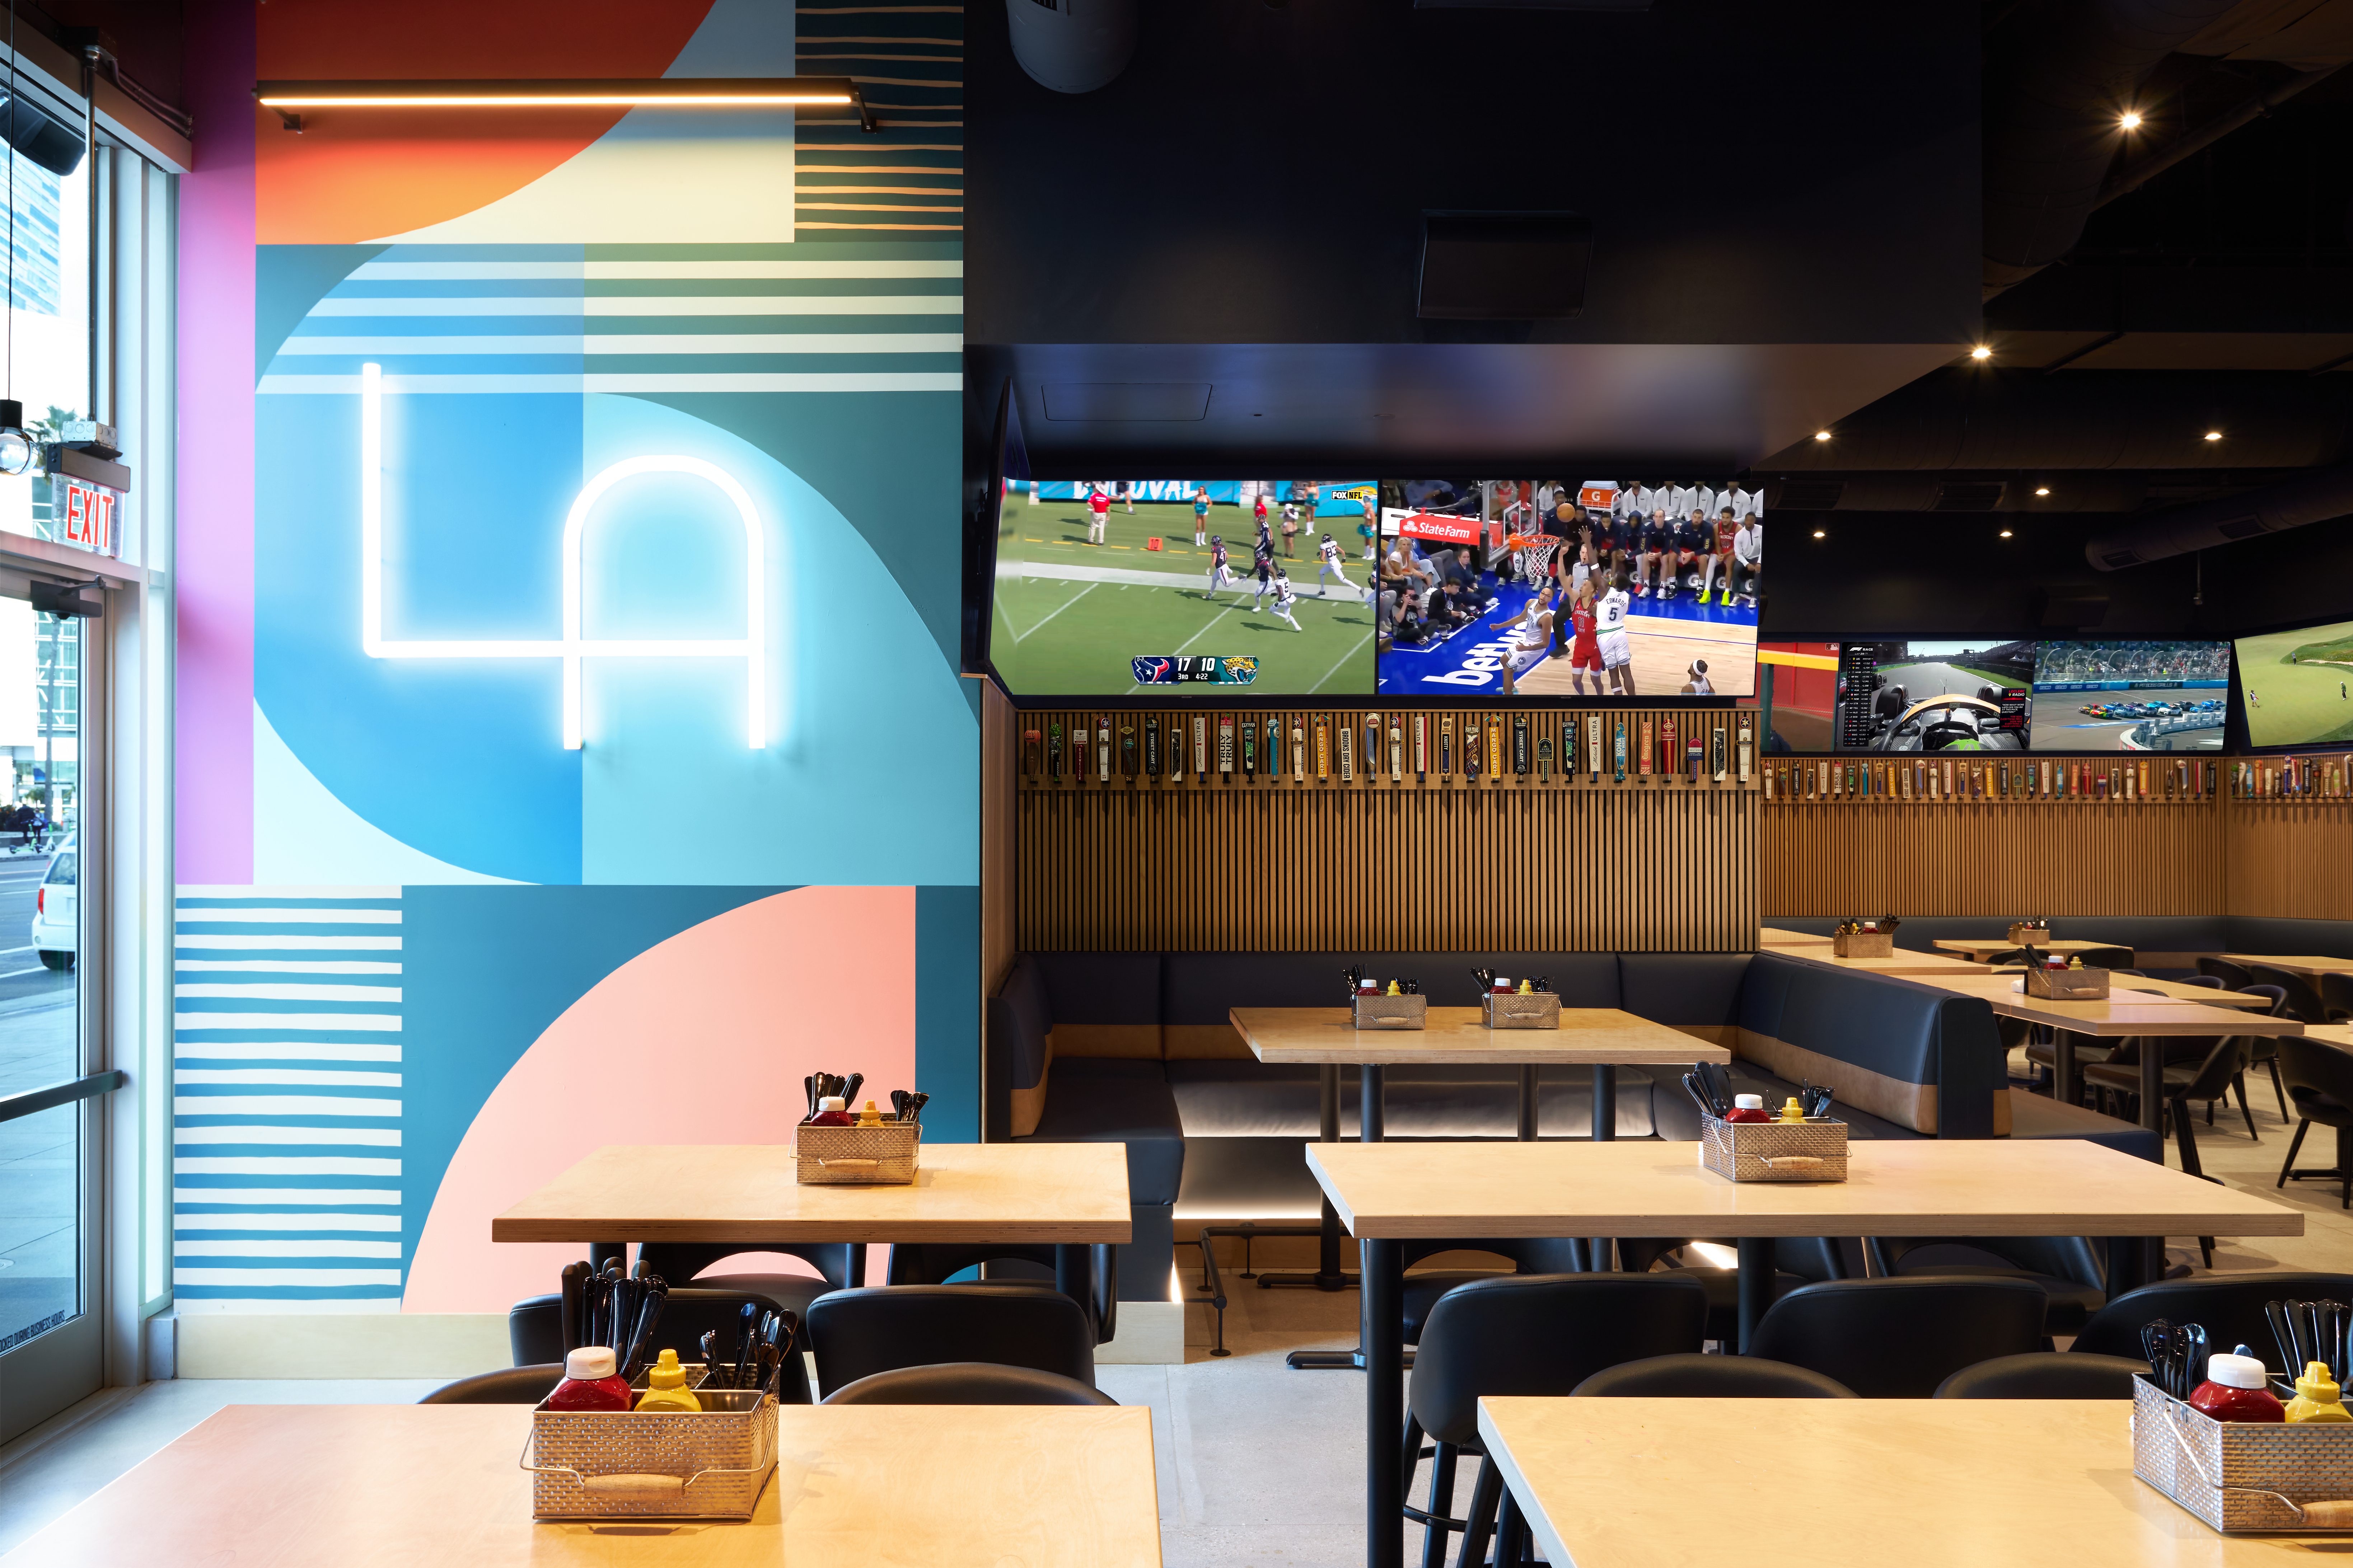 Local and family-owned 33 Taps is a neighborhood sports bar that wanted to establish a presence in downtown across from the sports/event area of L.A. Live. 

It is located on the ground floor of the new Moxy Downtown Los Angeles hotel by Marriott. 
